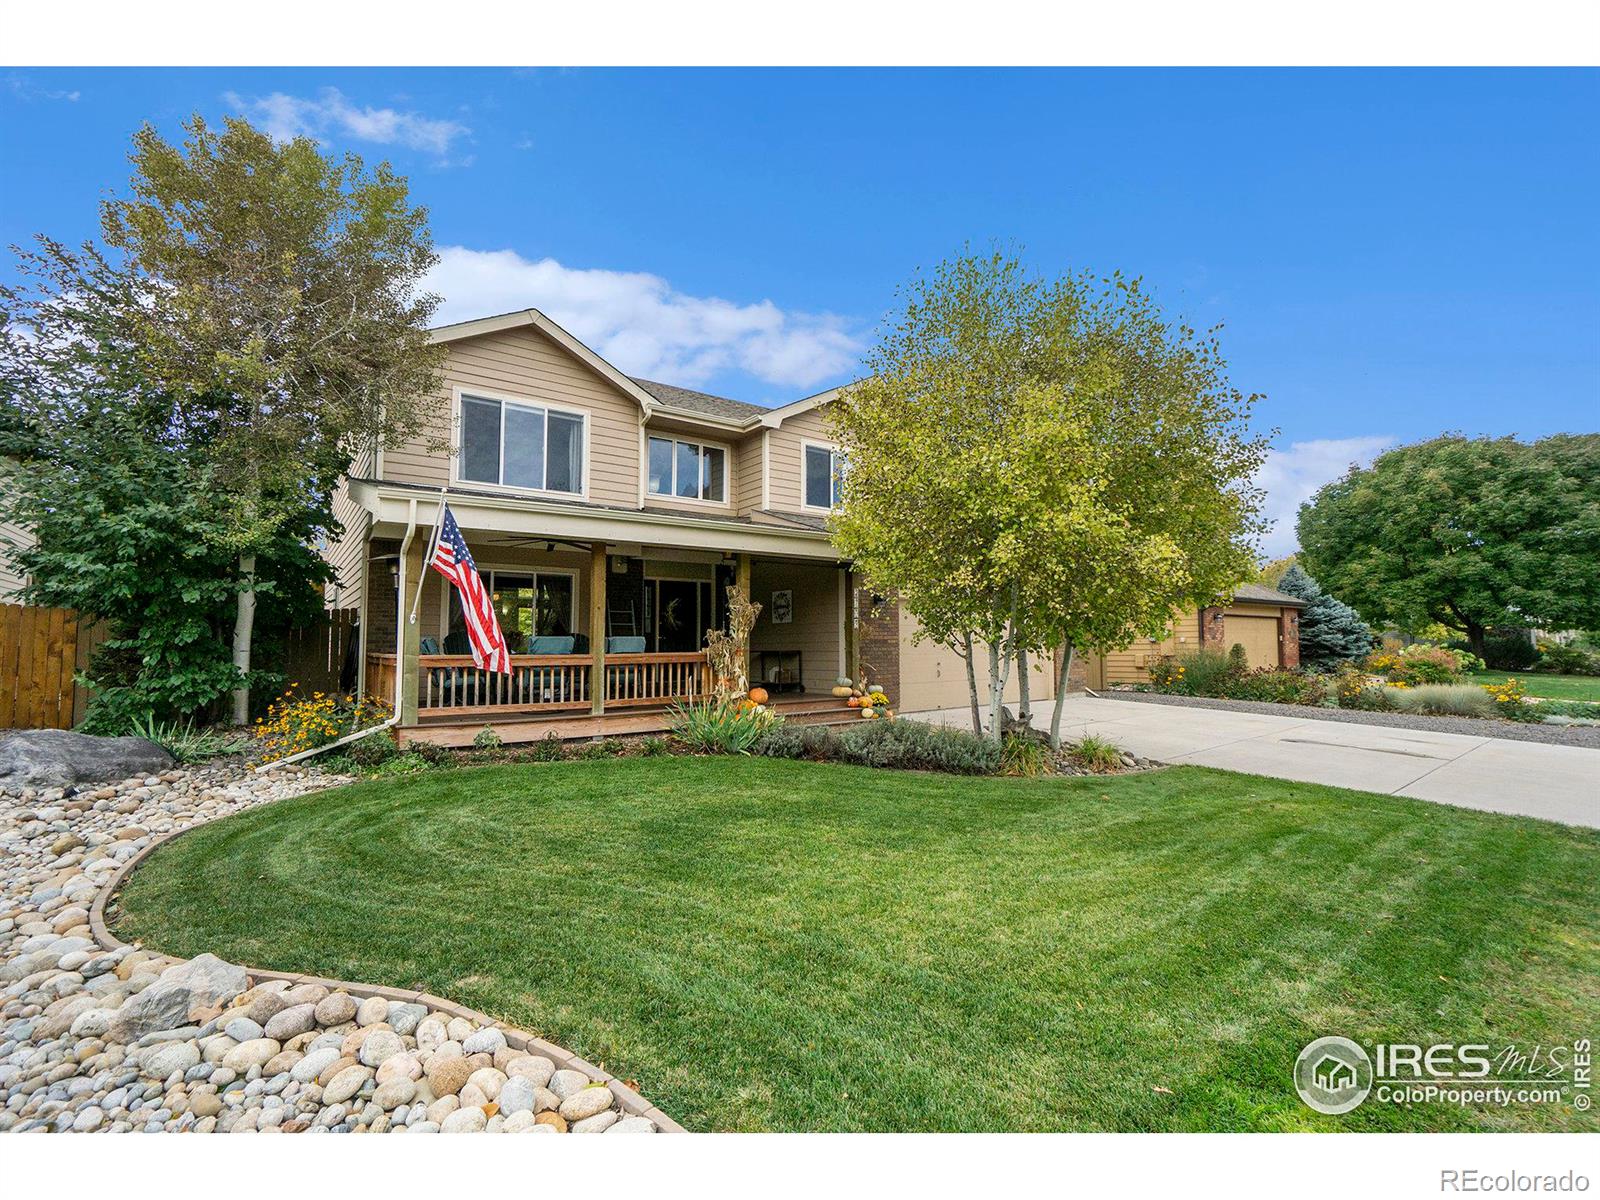 2709  stonehaven drive, Fort Collins sold home. Closed on 2024-02-29 for $775,000.